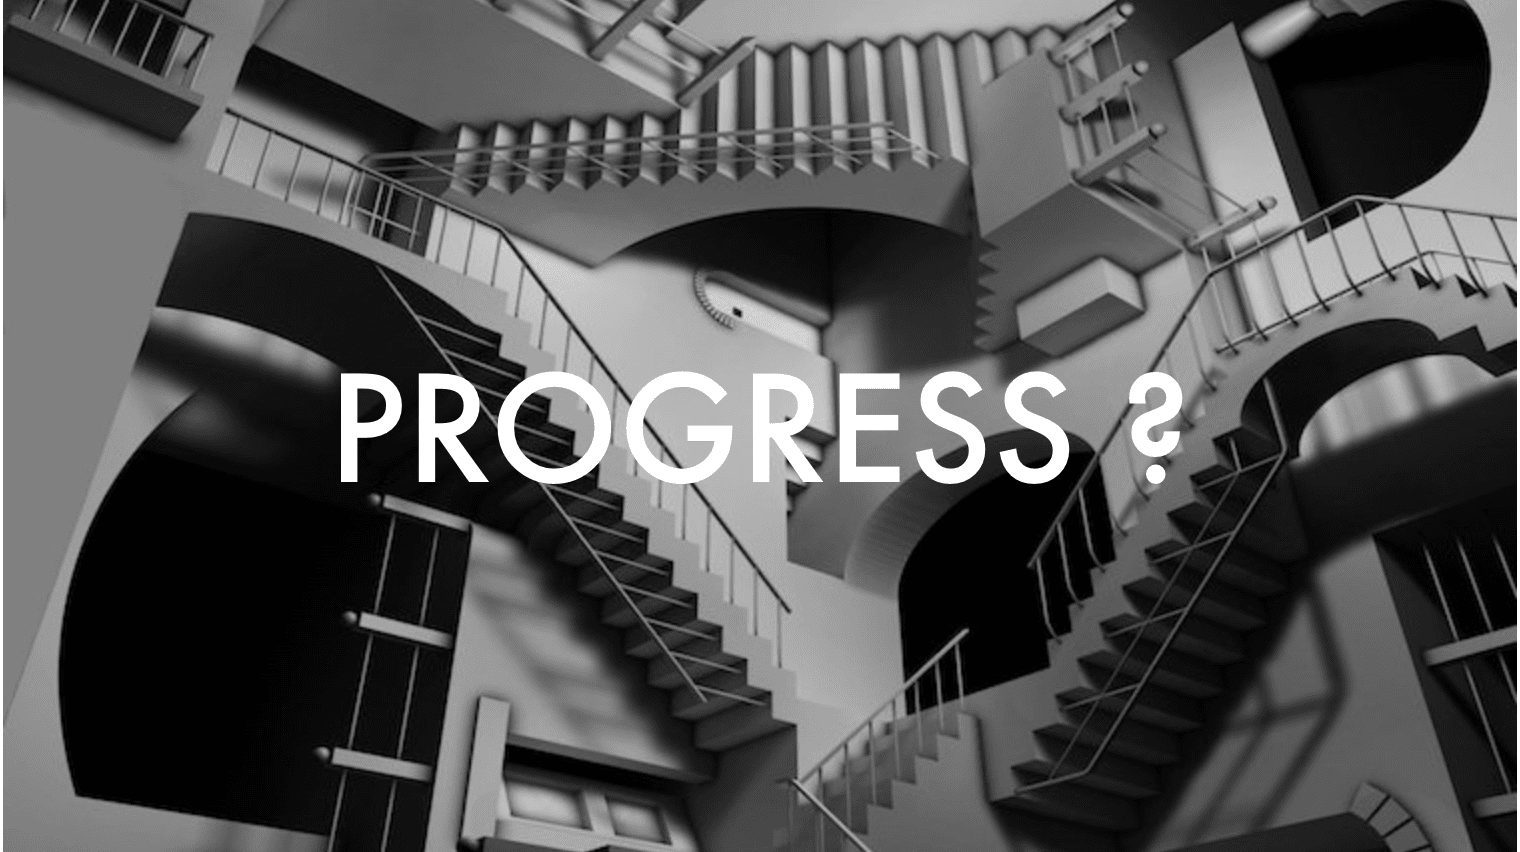 Is Progress Inevitable? The More Digital One Is, The Less Digital One Wants To Be?